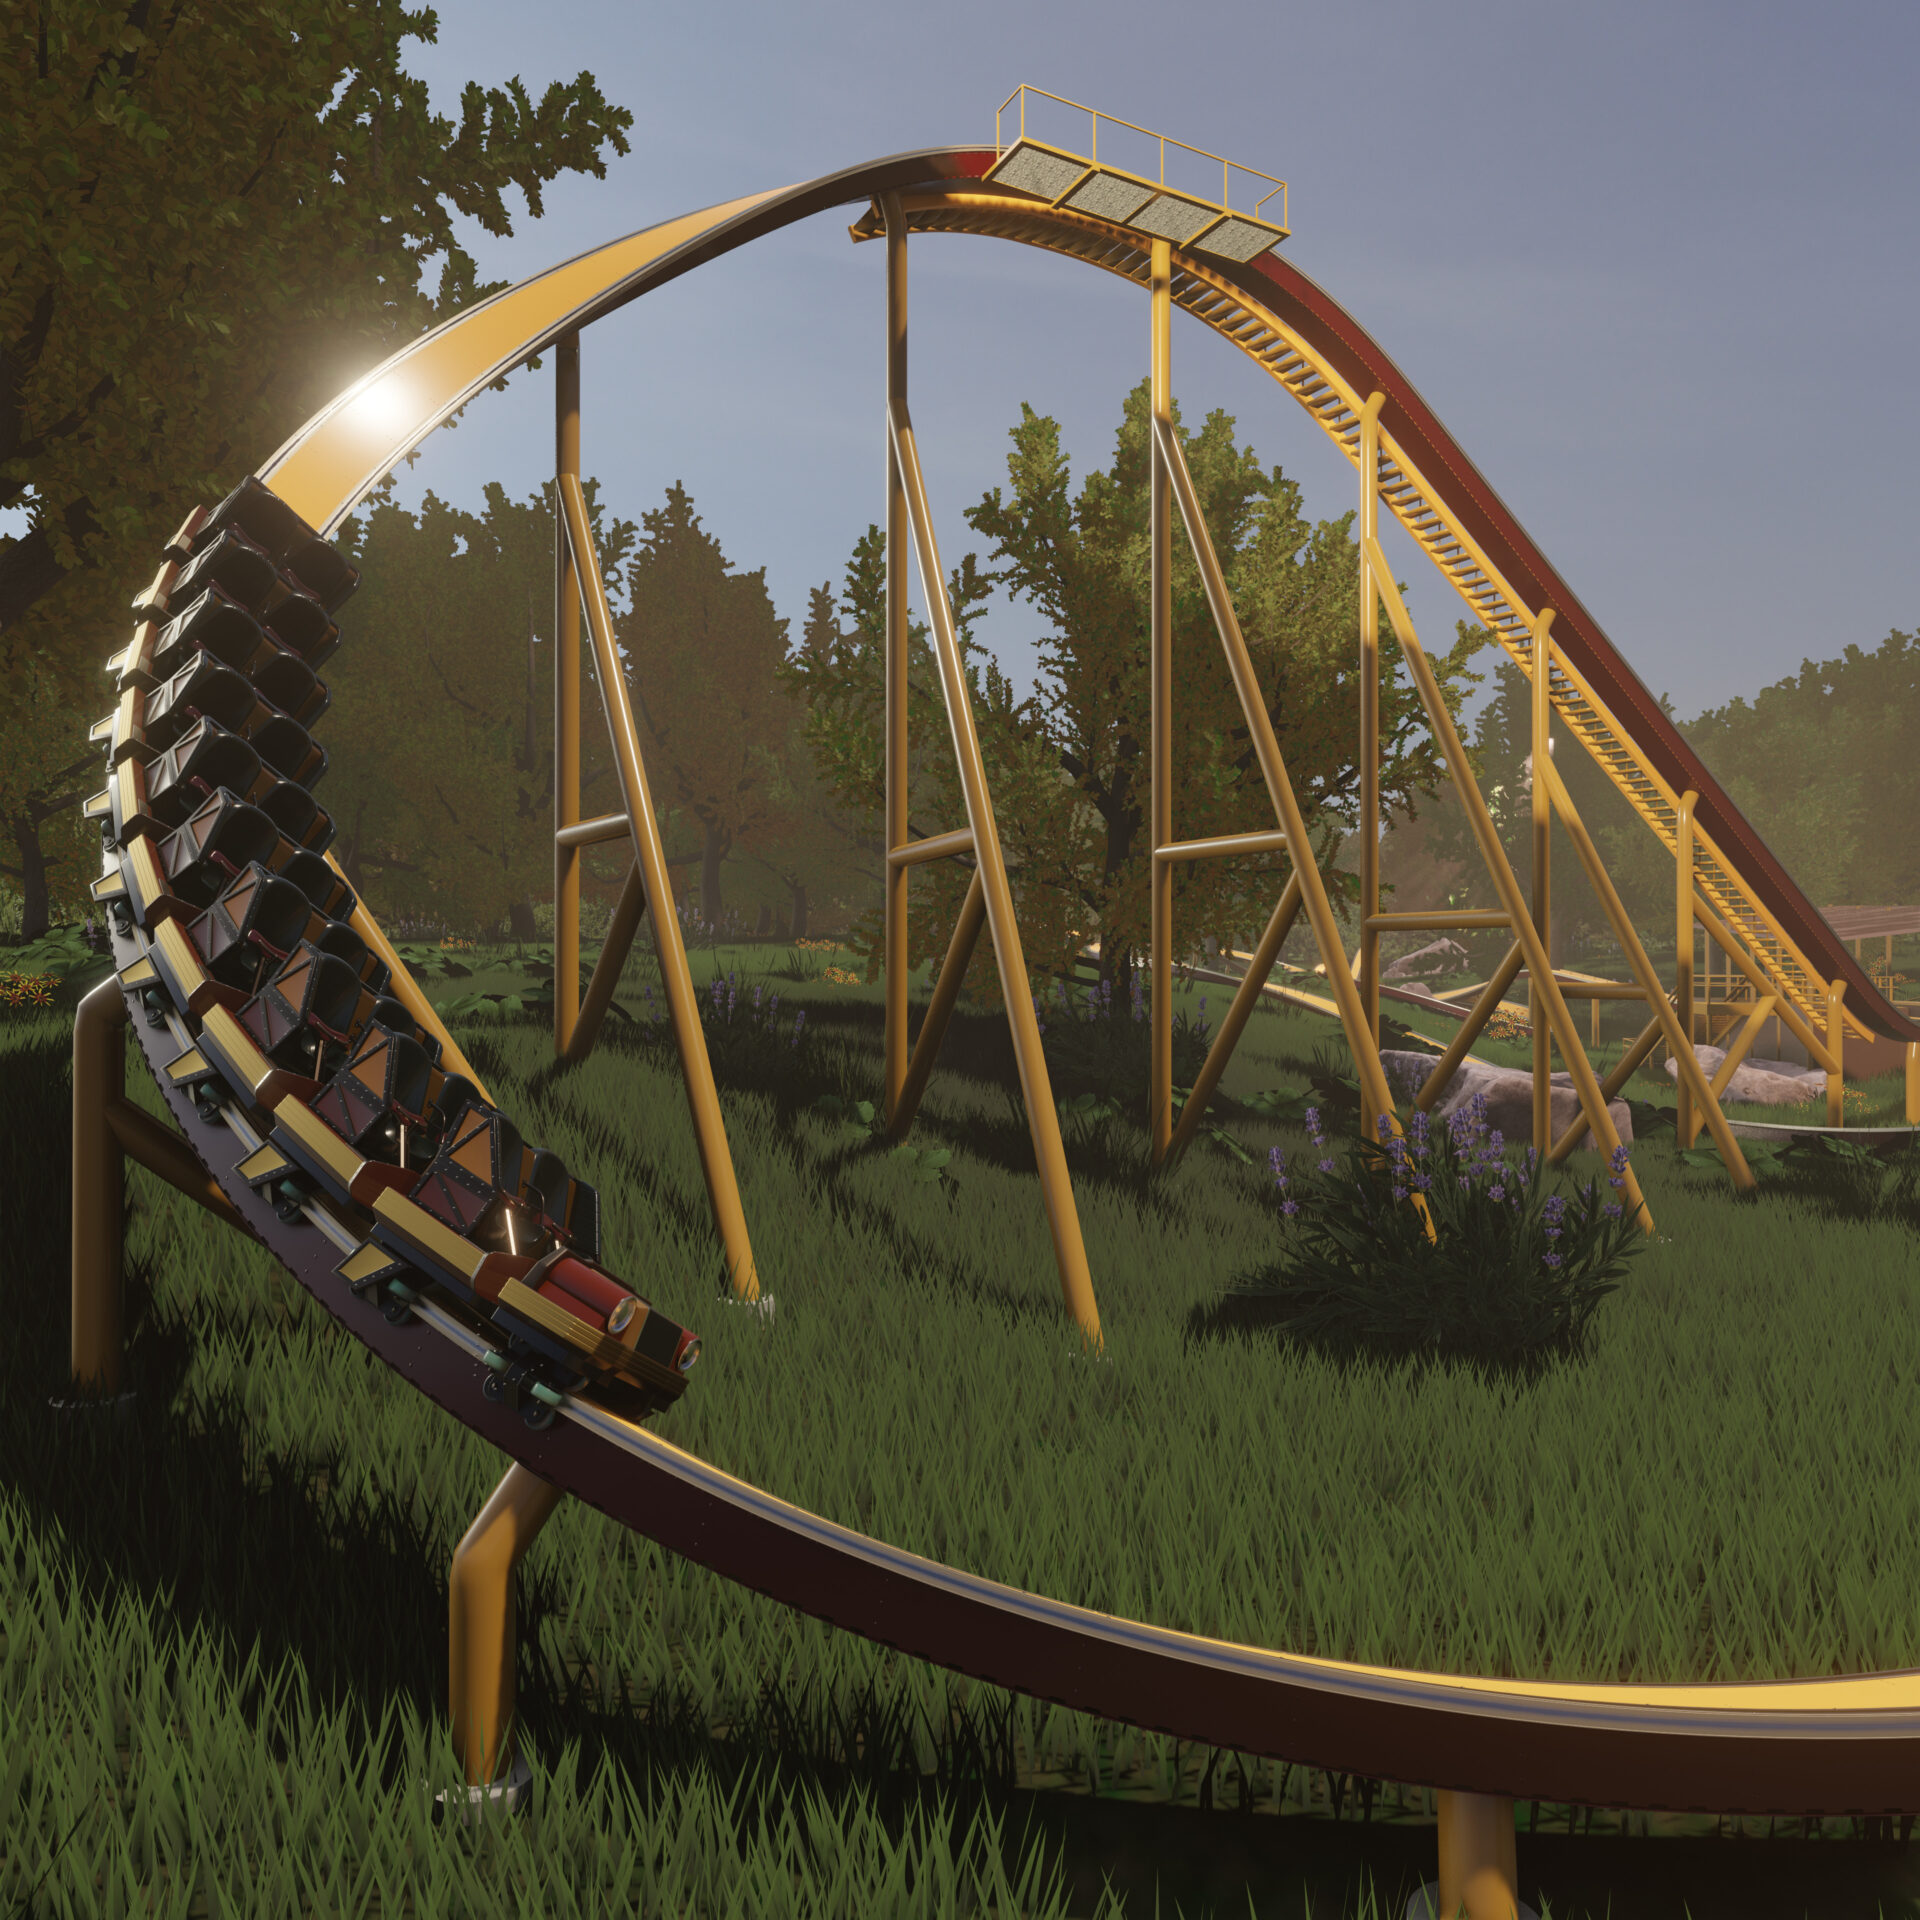 https://skylineattractions.com/wp-content/uploads/2022/11/TrailRunner-Track-First-Drop.jpg